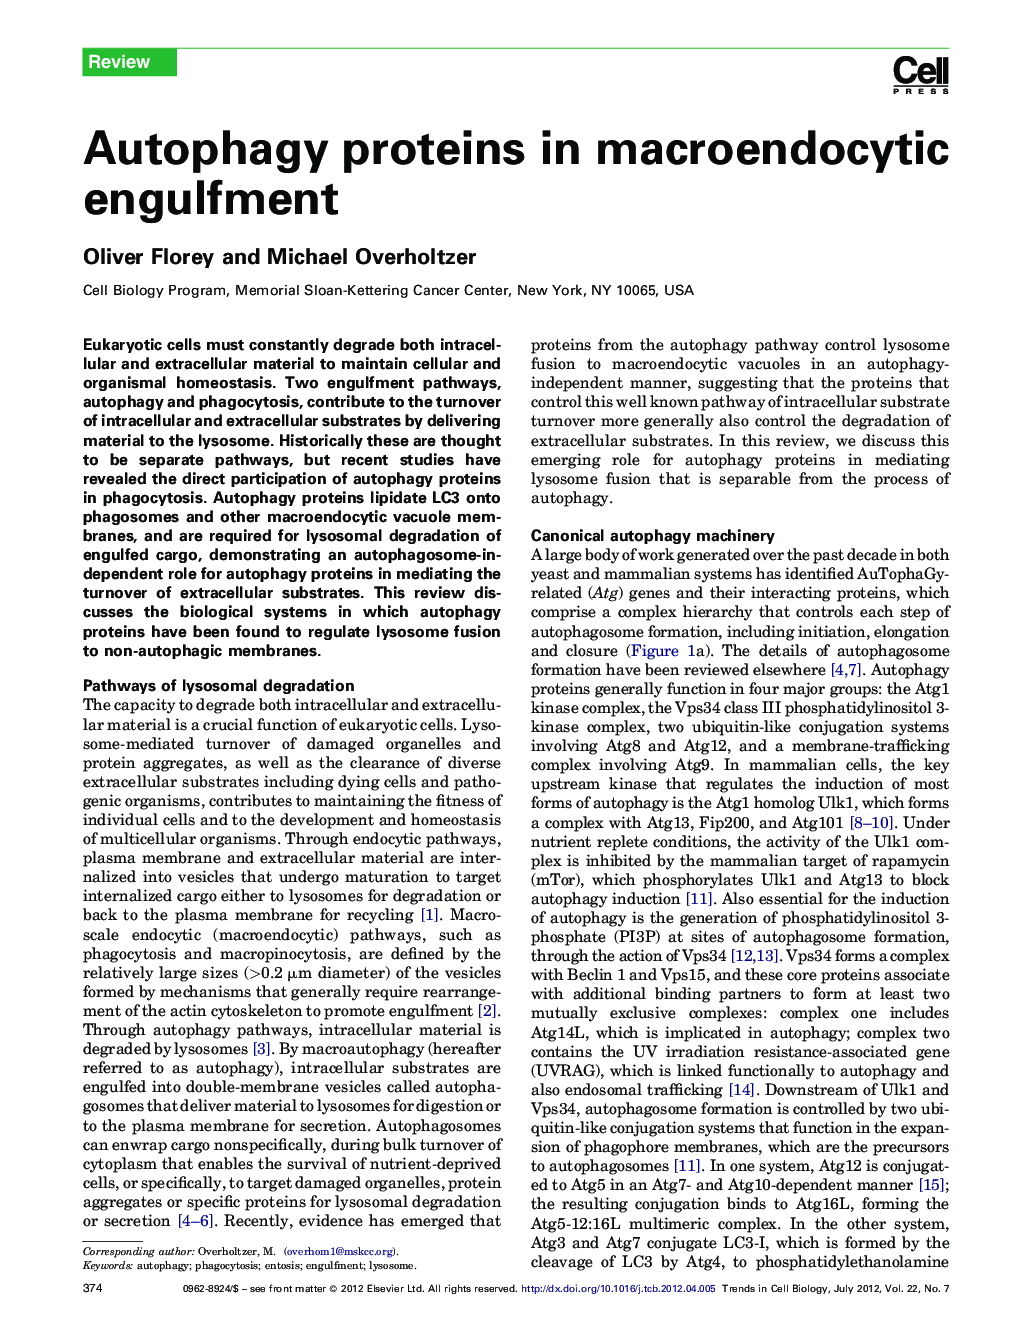 Autophagy proteins in macroendocytic engulfment